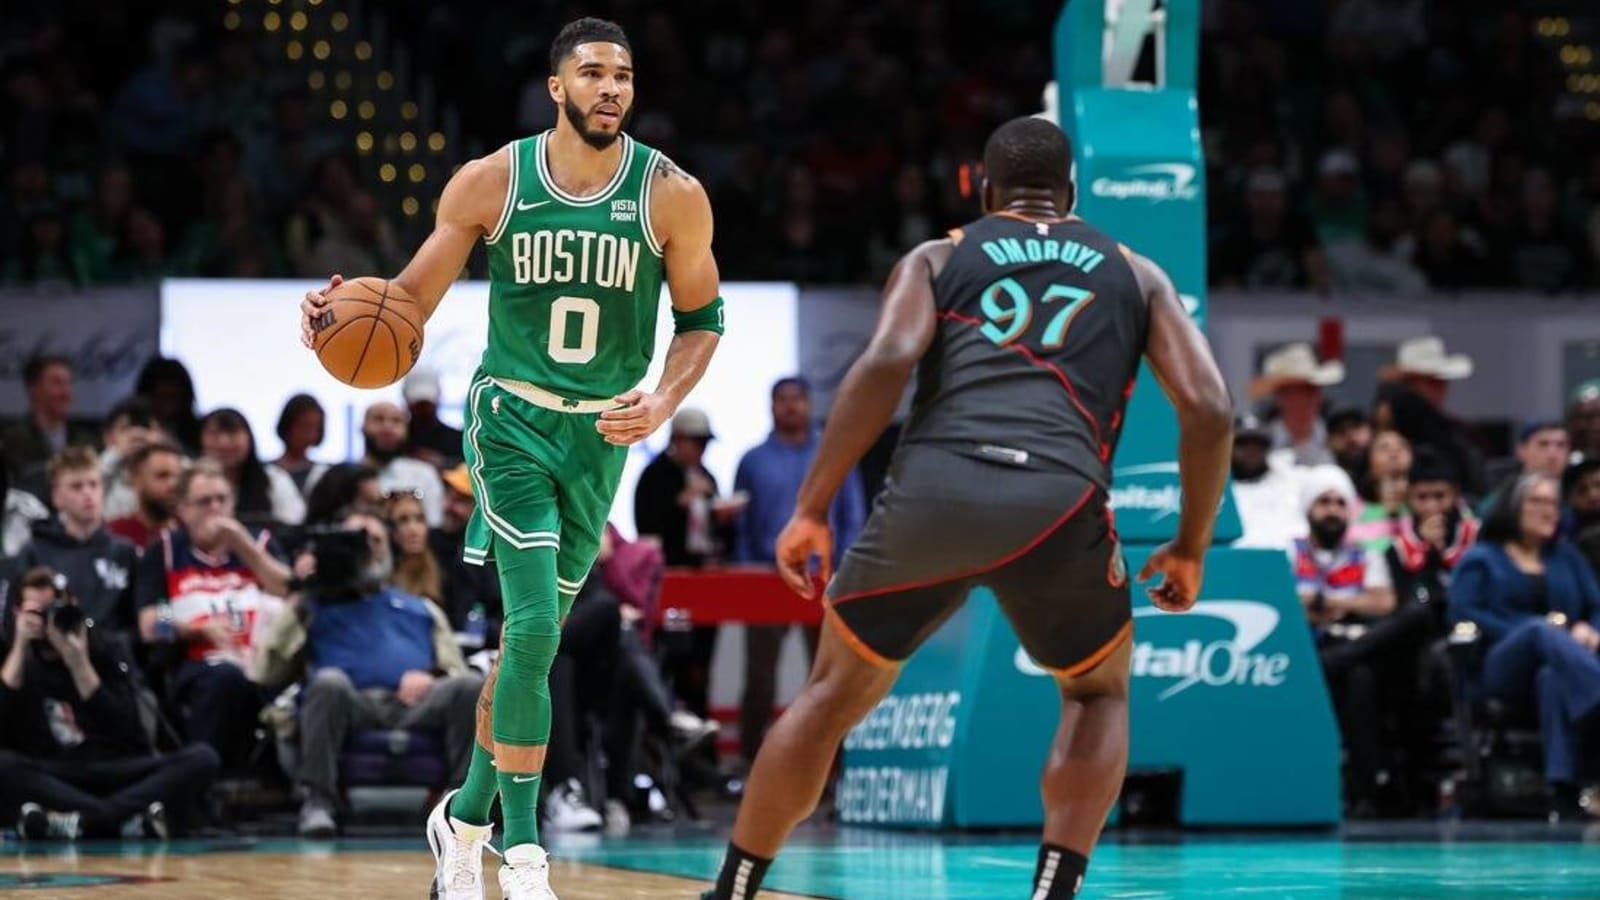 Sam Hauser has career-best game as Celtics rout Wizards